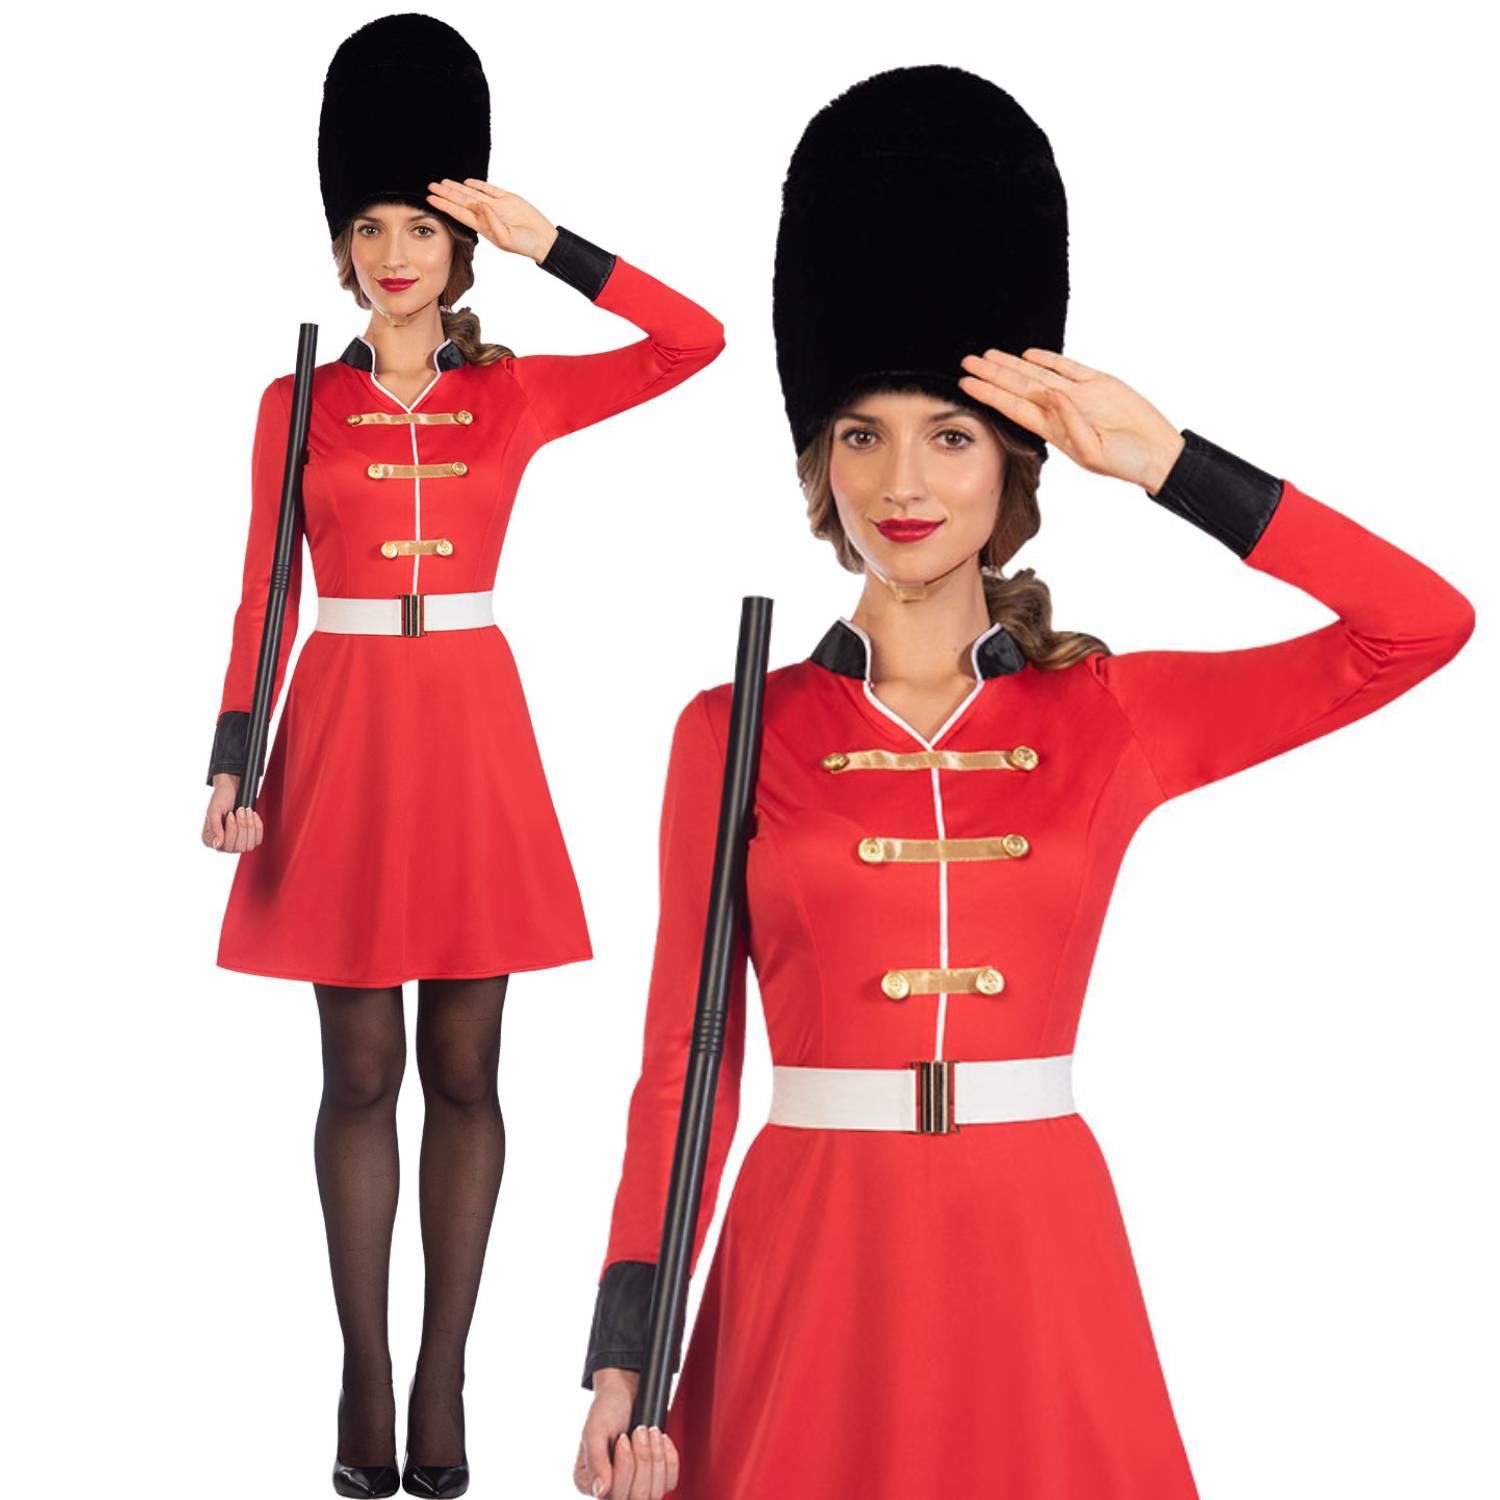 British Royal Guard Costume for Ladies by Amscan 9908745 available here at Karnival Costumes online party shop